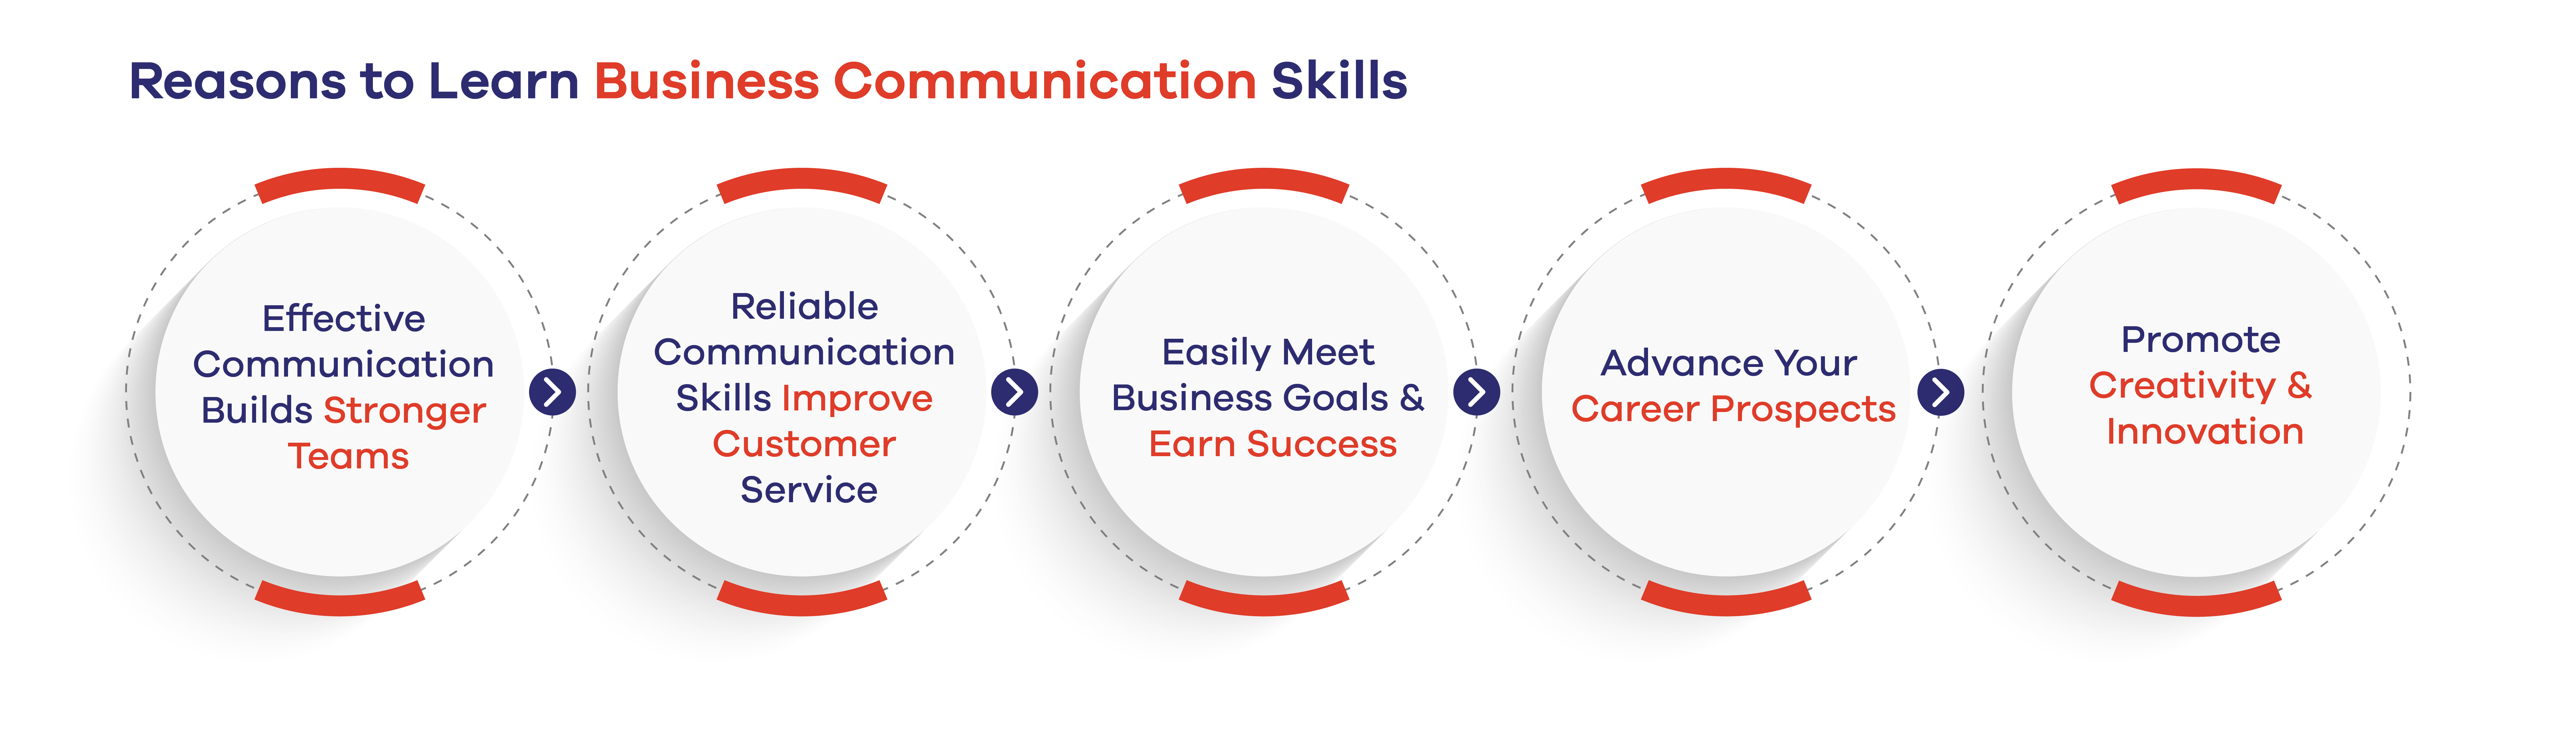 Reasons to Learn Business Communication Skills 